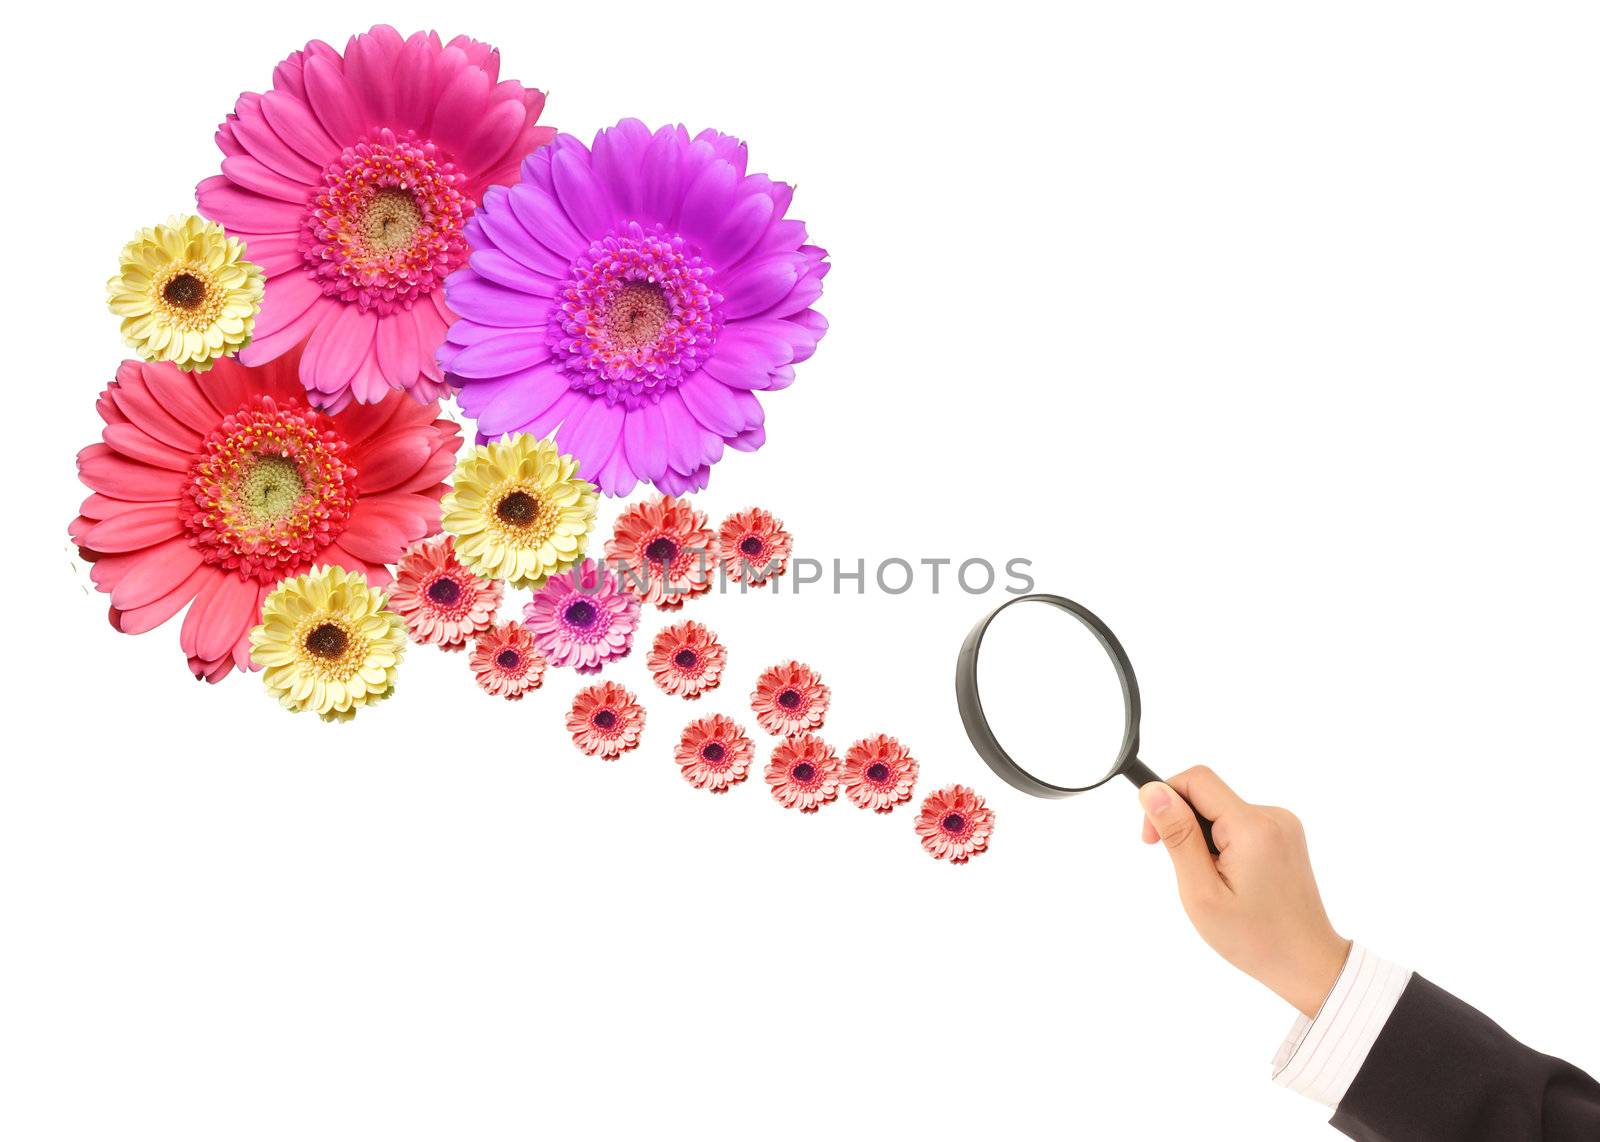 flower and magnifying glass on a white background.